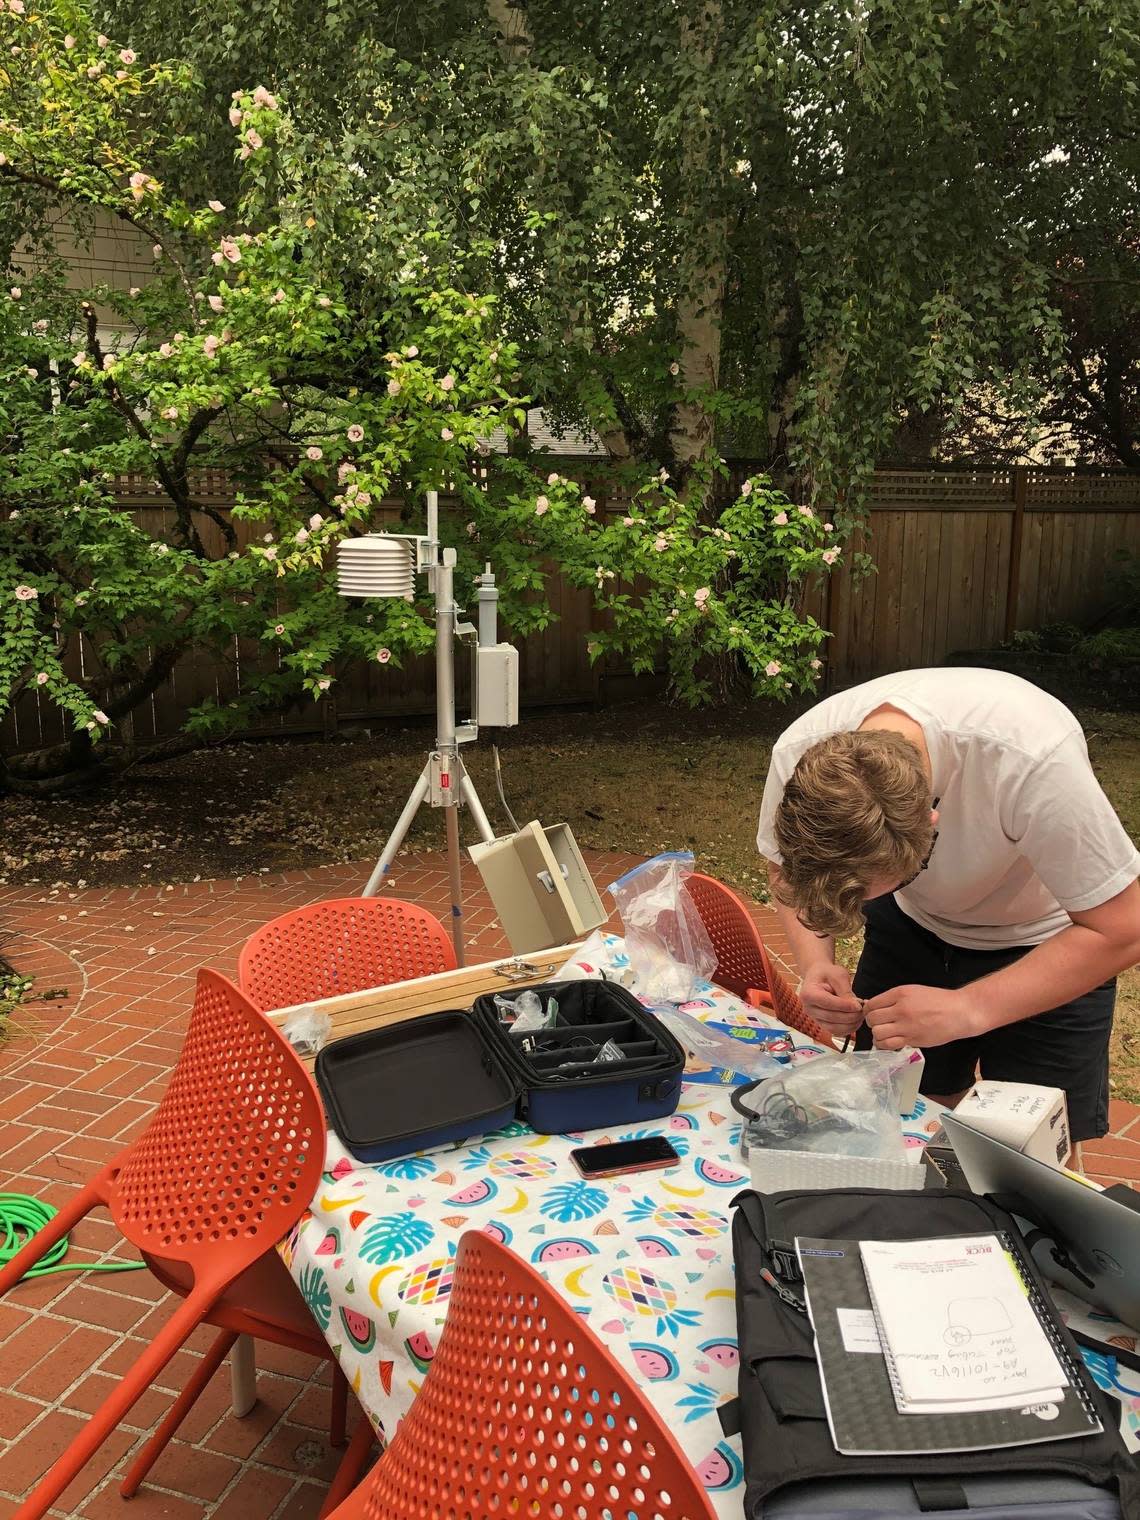 PNNL data scientist Sam Rosenberg inspects scientific equipment outside a home in Portland, Ore., when wildfires drove air quality levels to particularly unhealthy levels in 2020.